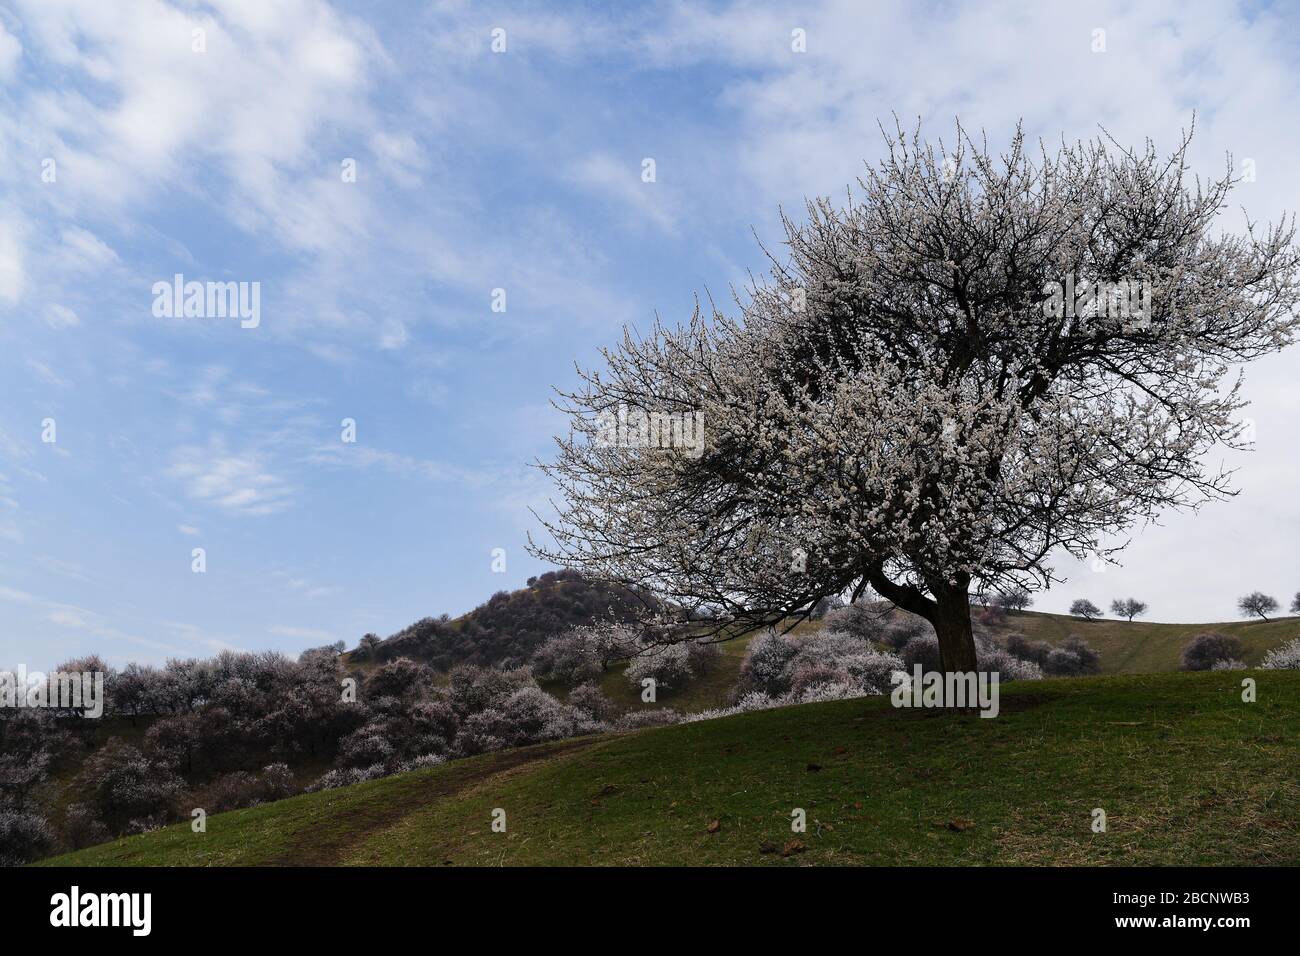 Ili. 4th Apr, 2020. Photo taken on April 4, 2020 shows a blossoming apricot tree at a valley in Xinyuan County of Ili Kazakh Autonomous Prefecture, northwest China's Xinjiang Uygur Autonomous Region. Credit: Song Yanhua/Xinhua/Alamy Live News Stock Photo